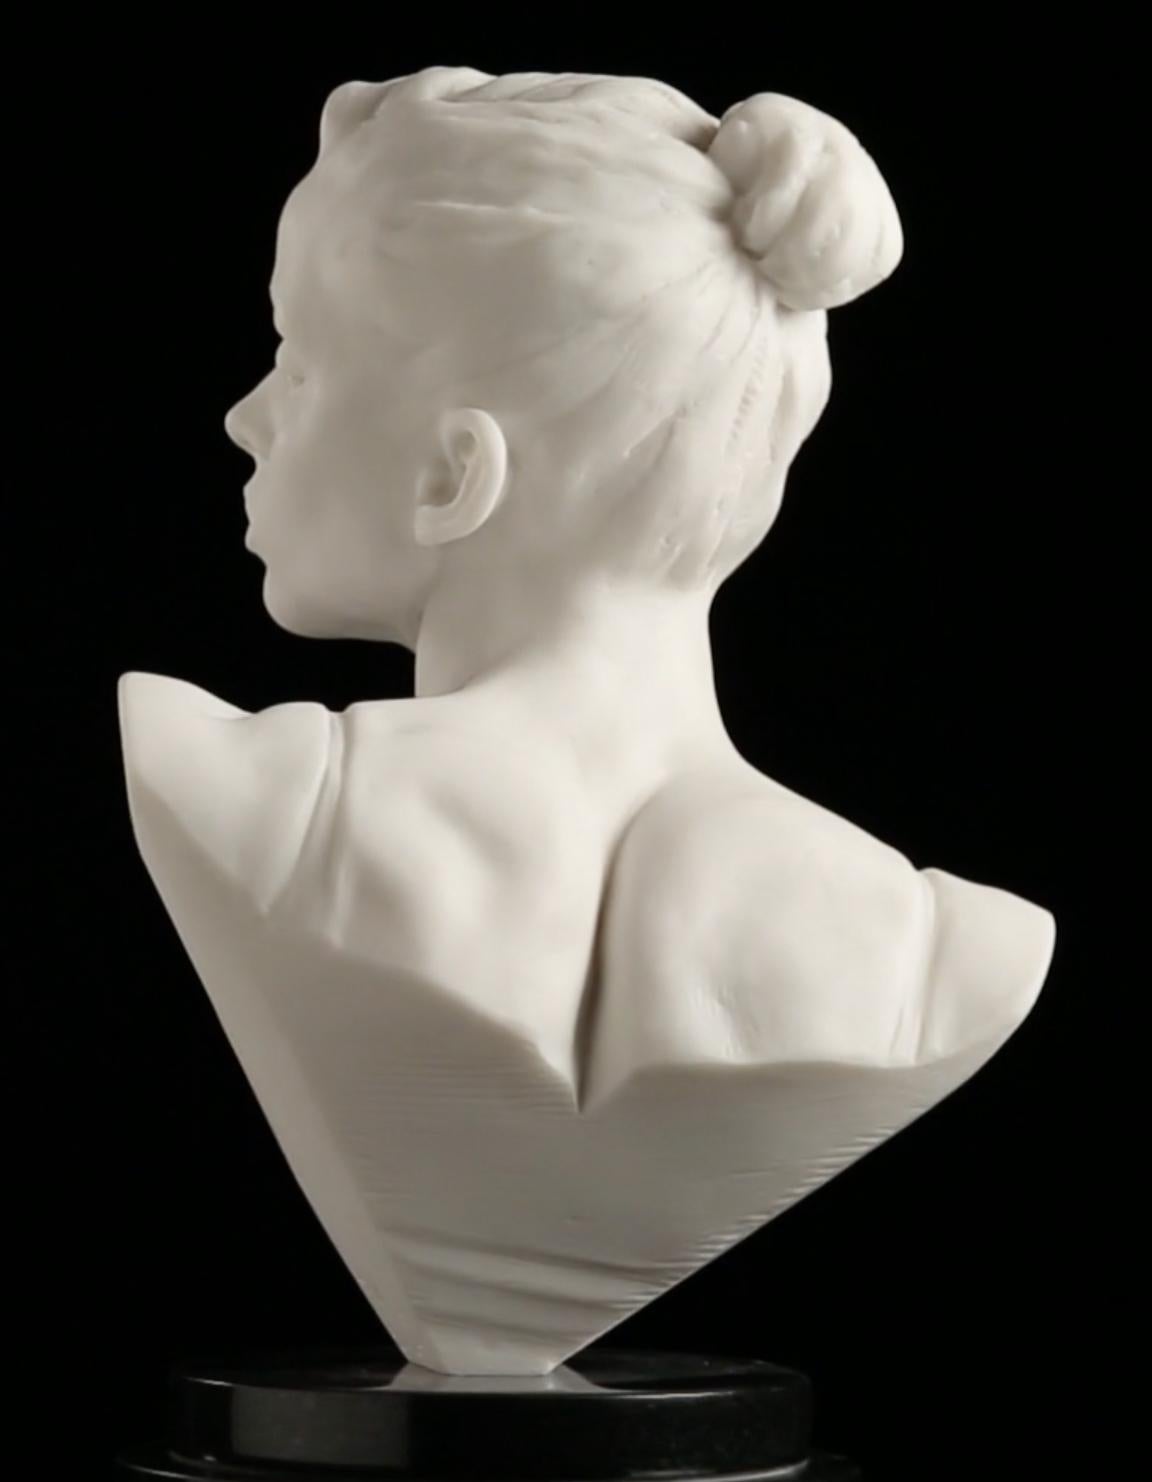 Katherine Bust Atelier, Marble Dust uses cast carrara marble and draws on Richard MacDonald's unique sensitivity to the experience of the dancer. Based on a classical study for the masterwork Dance the Dream, this beautiful portrait captures the